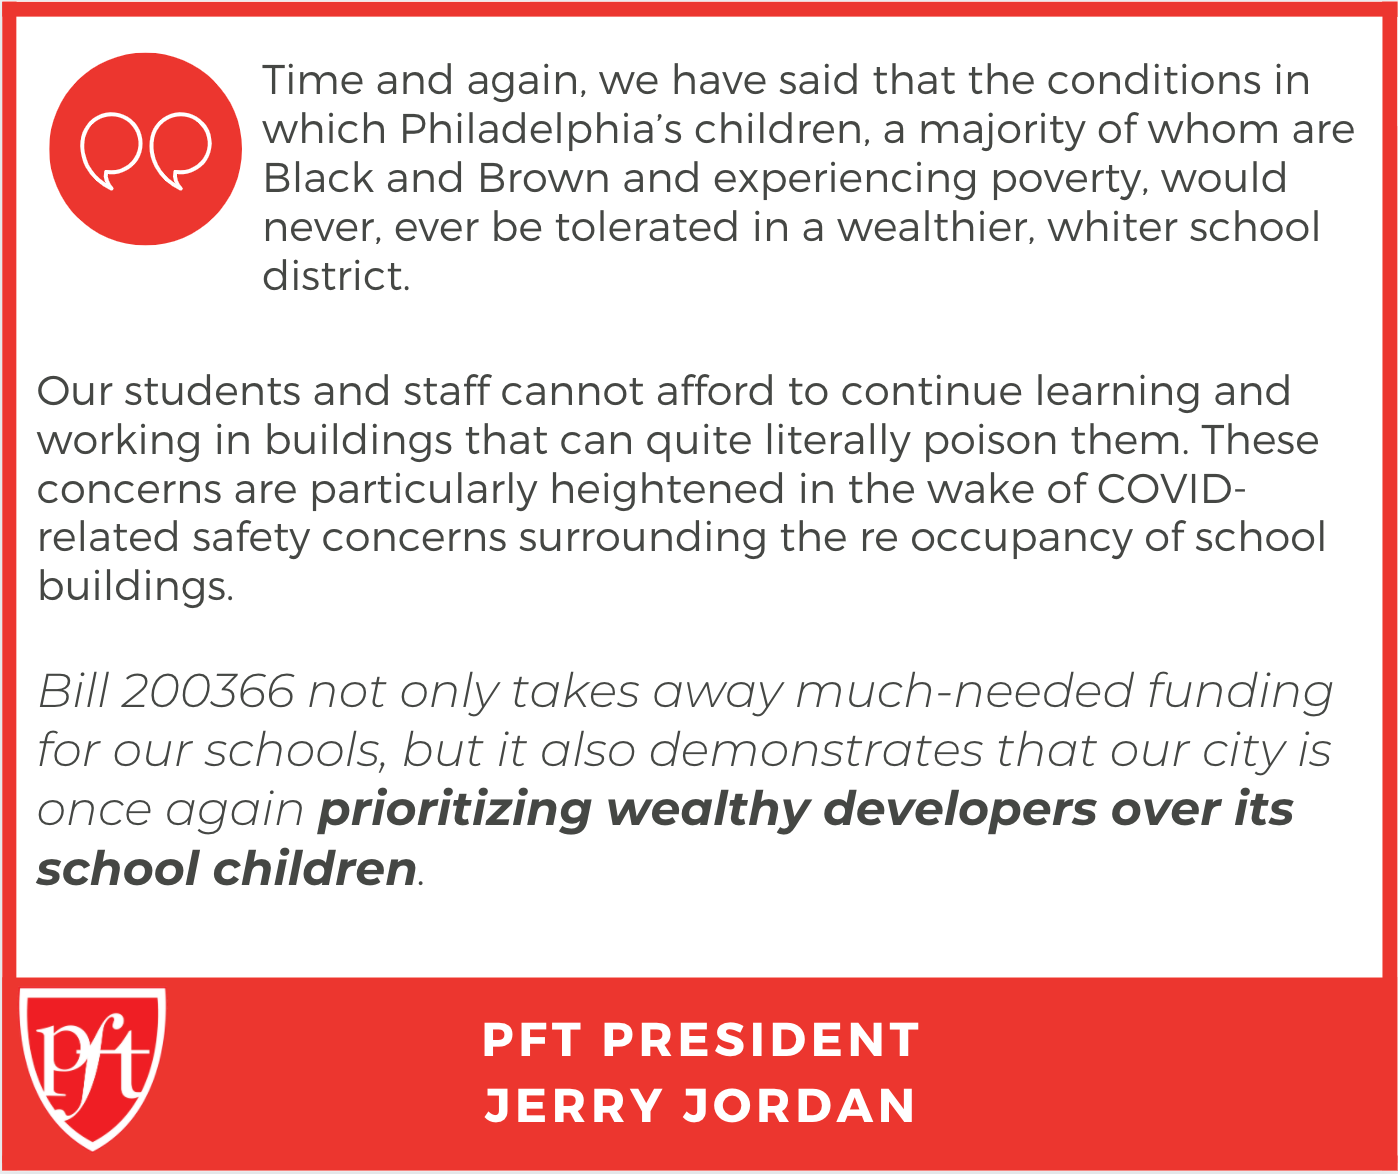 Quote from PFT President Jerry Jordan: "Time and again, we have said that the conditions in which Philadelphia’s children, a majority of whom are Black and Brown and experiencing poverty, would never, ever be tolerated in a wealthier, whiter school district. Our students and staff cannot afford to continue learning and working in buildings that can quite literally poison them. These concerns are particularly heightened in the wake of COVID-related safety concerns surrounding the re-occupancy of school buildings. Bill 200366 not only takes away much-needed funding for our schools, but it also demonstrates that our city is once again prioritizing wealthy developers over its school children."